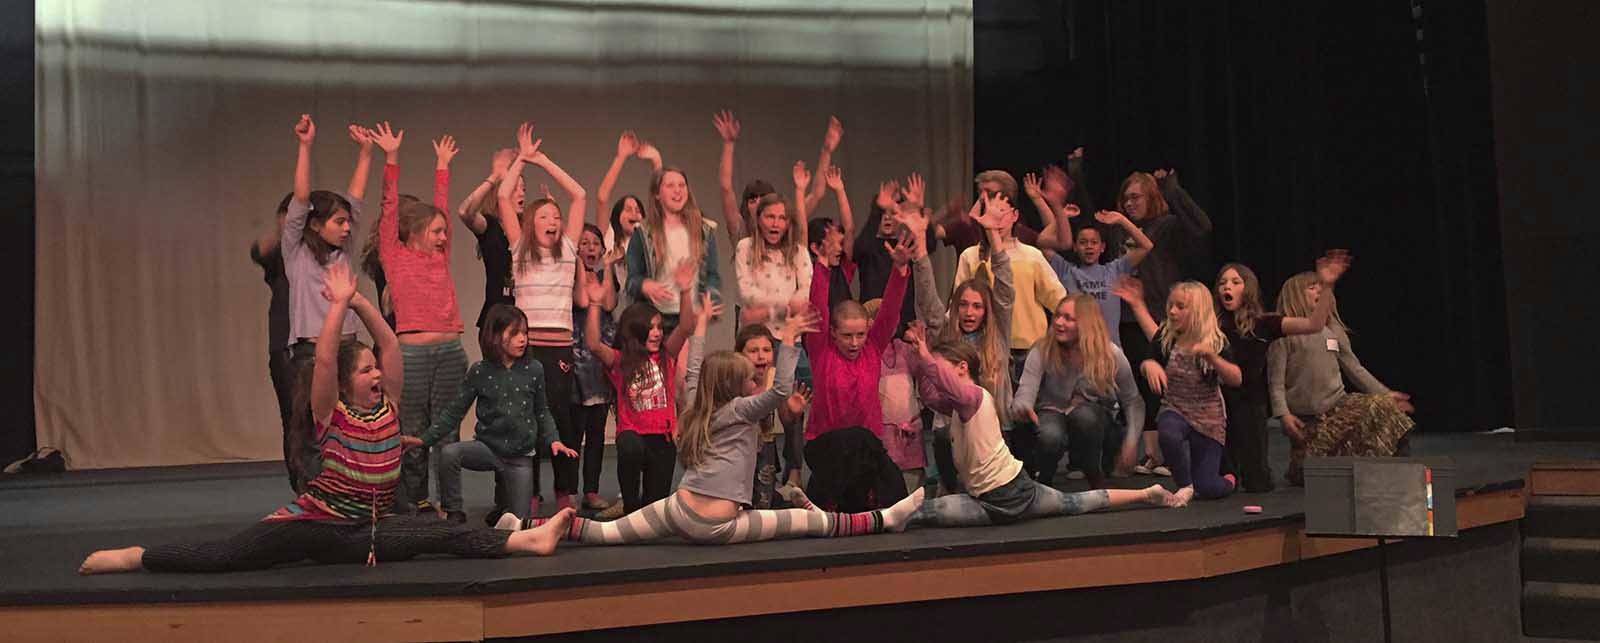 Orcas Island’s youth talent show returns to Orcas Center